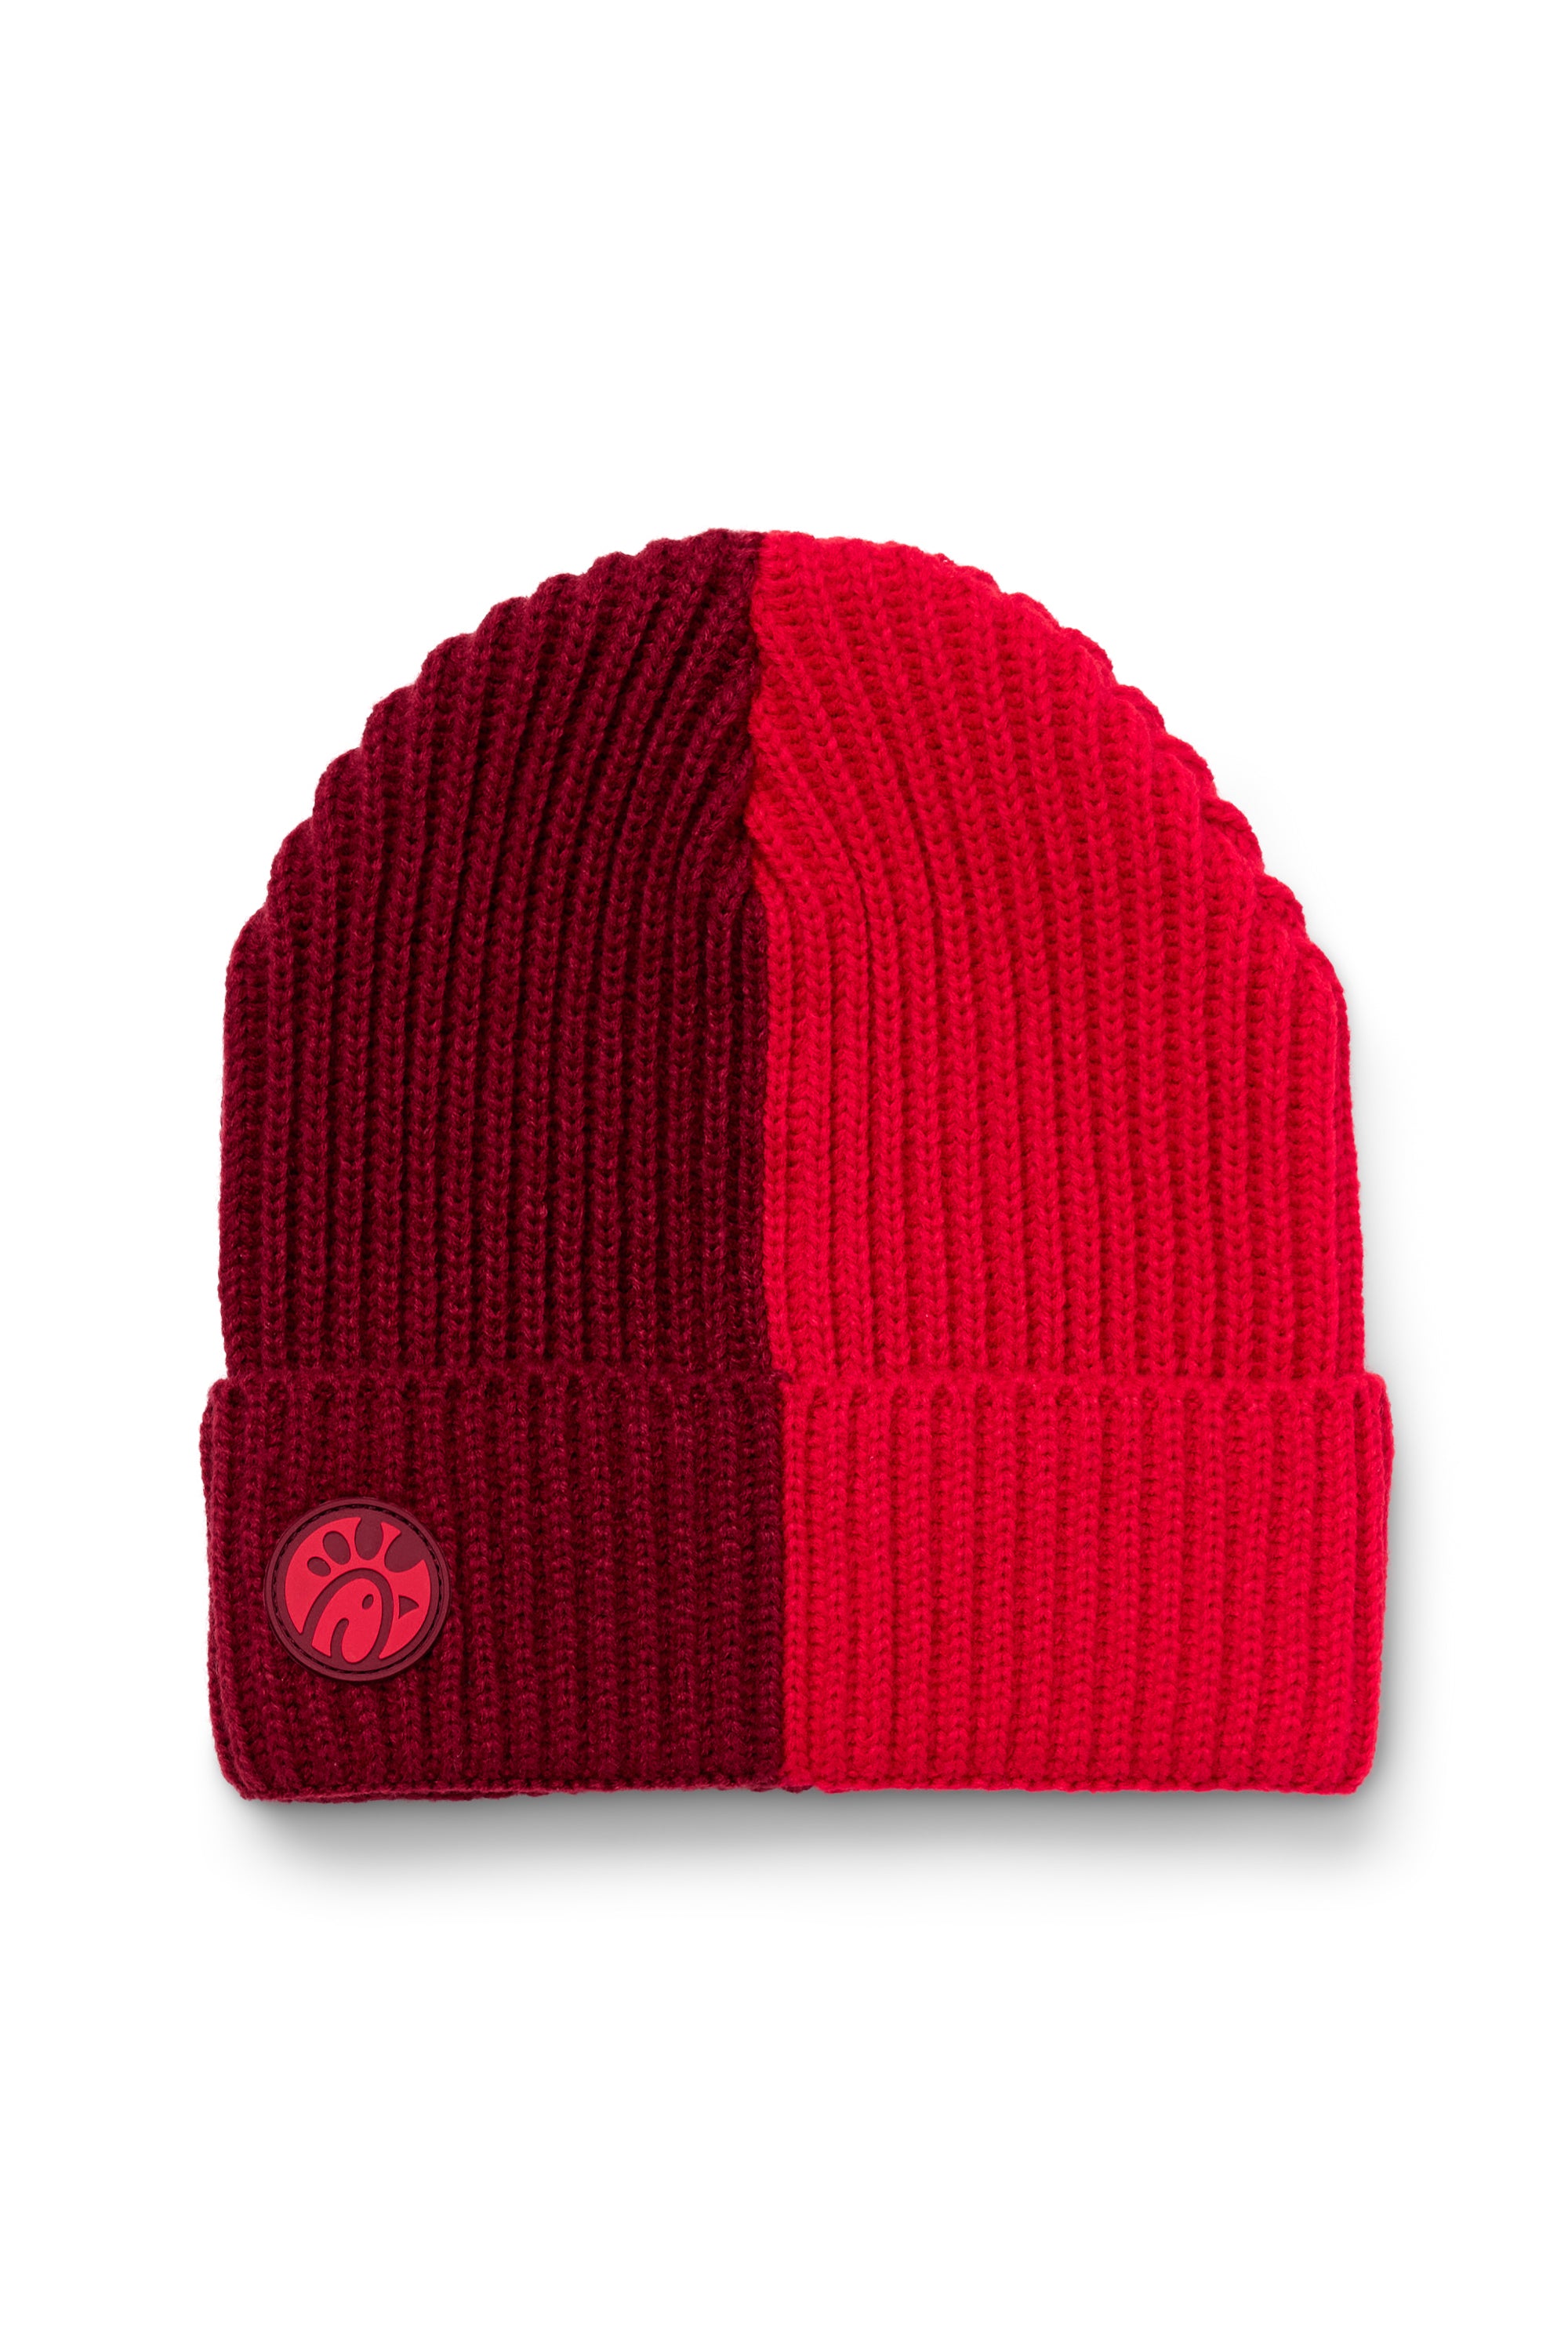 Color Blocked Red Cuffed Knit Beanie | Chick-fil-A – Shop Chick-fil-A